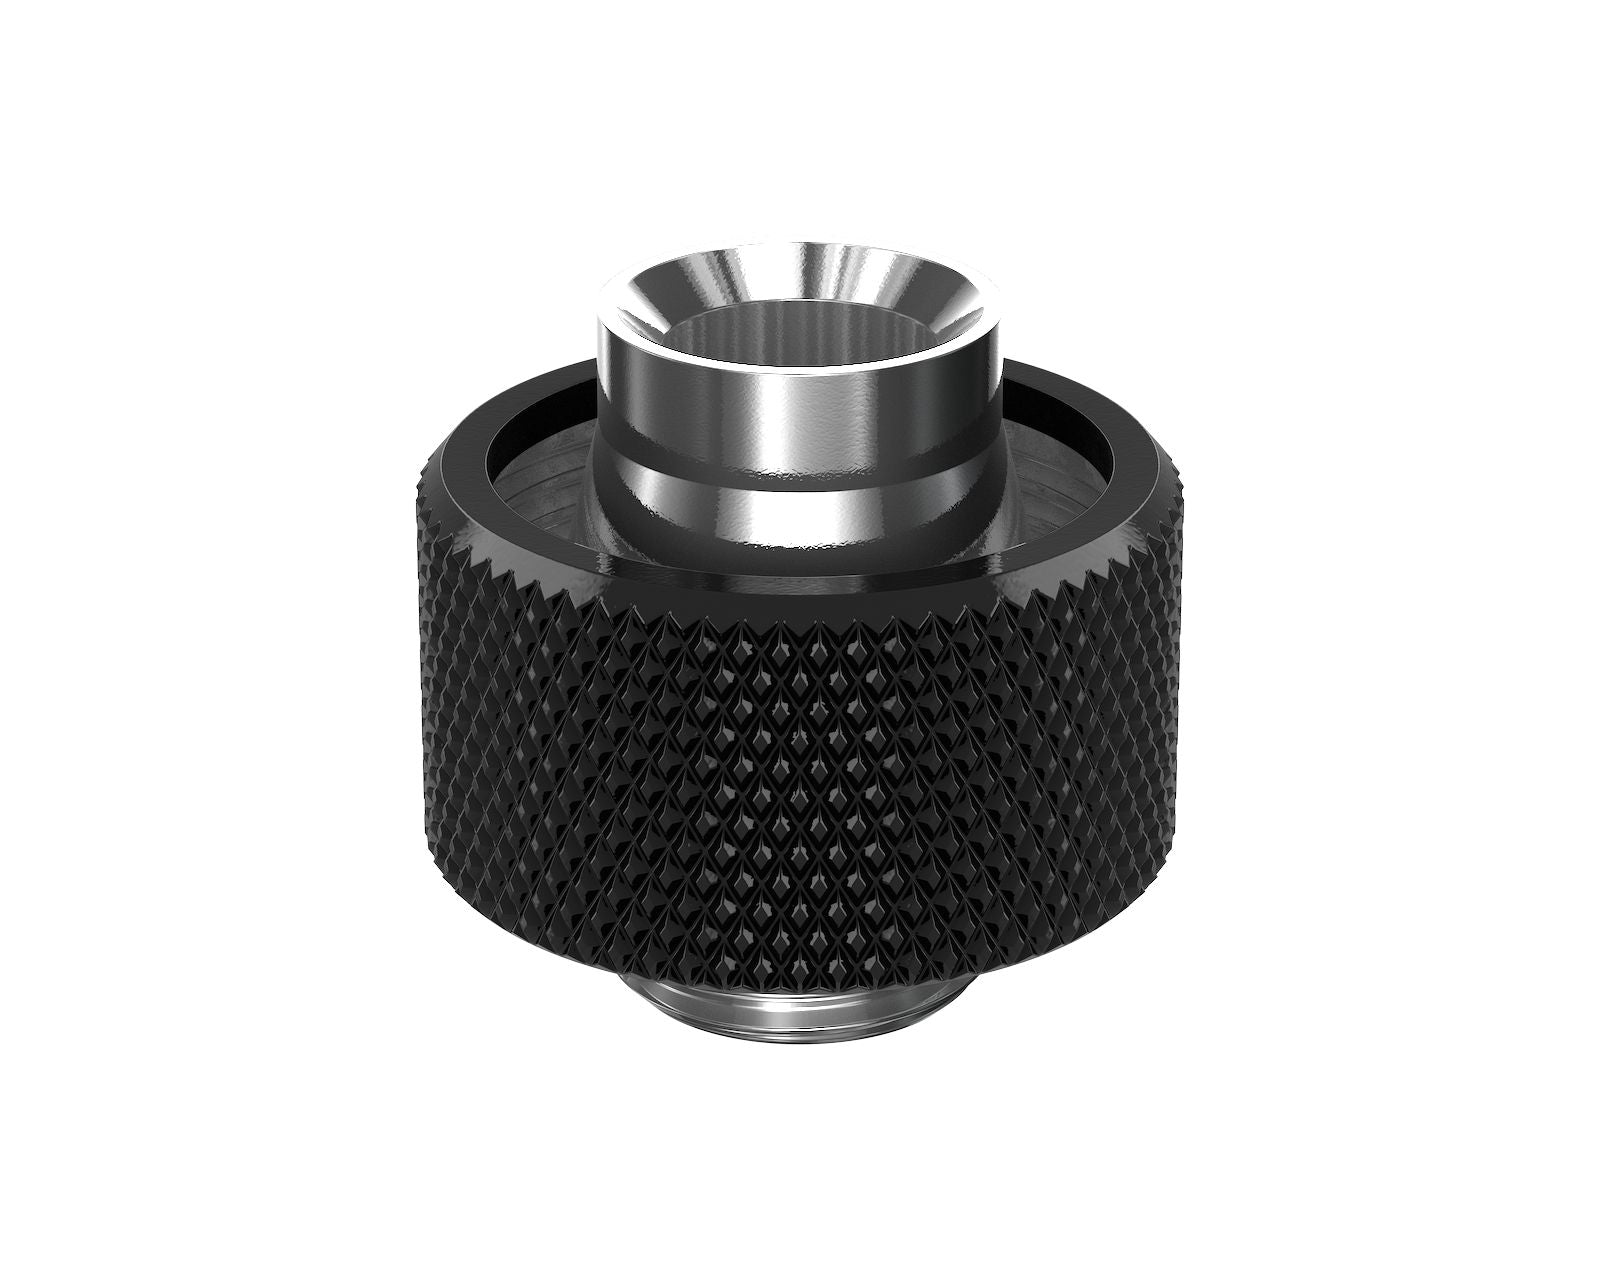 PrimoChill SecureFit SX - Premium Compression Fitting For 1/2in ID x 3/4in OD Flexible Tubing (F-SFSX34) - Available in 20+ Colors, Custom Watercooling Loop Ready - Satin Black